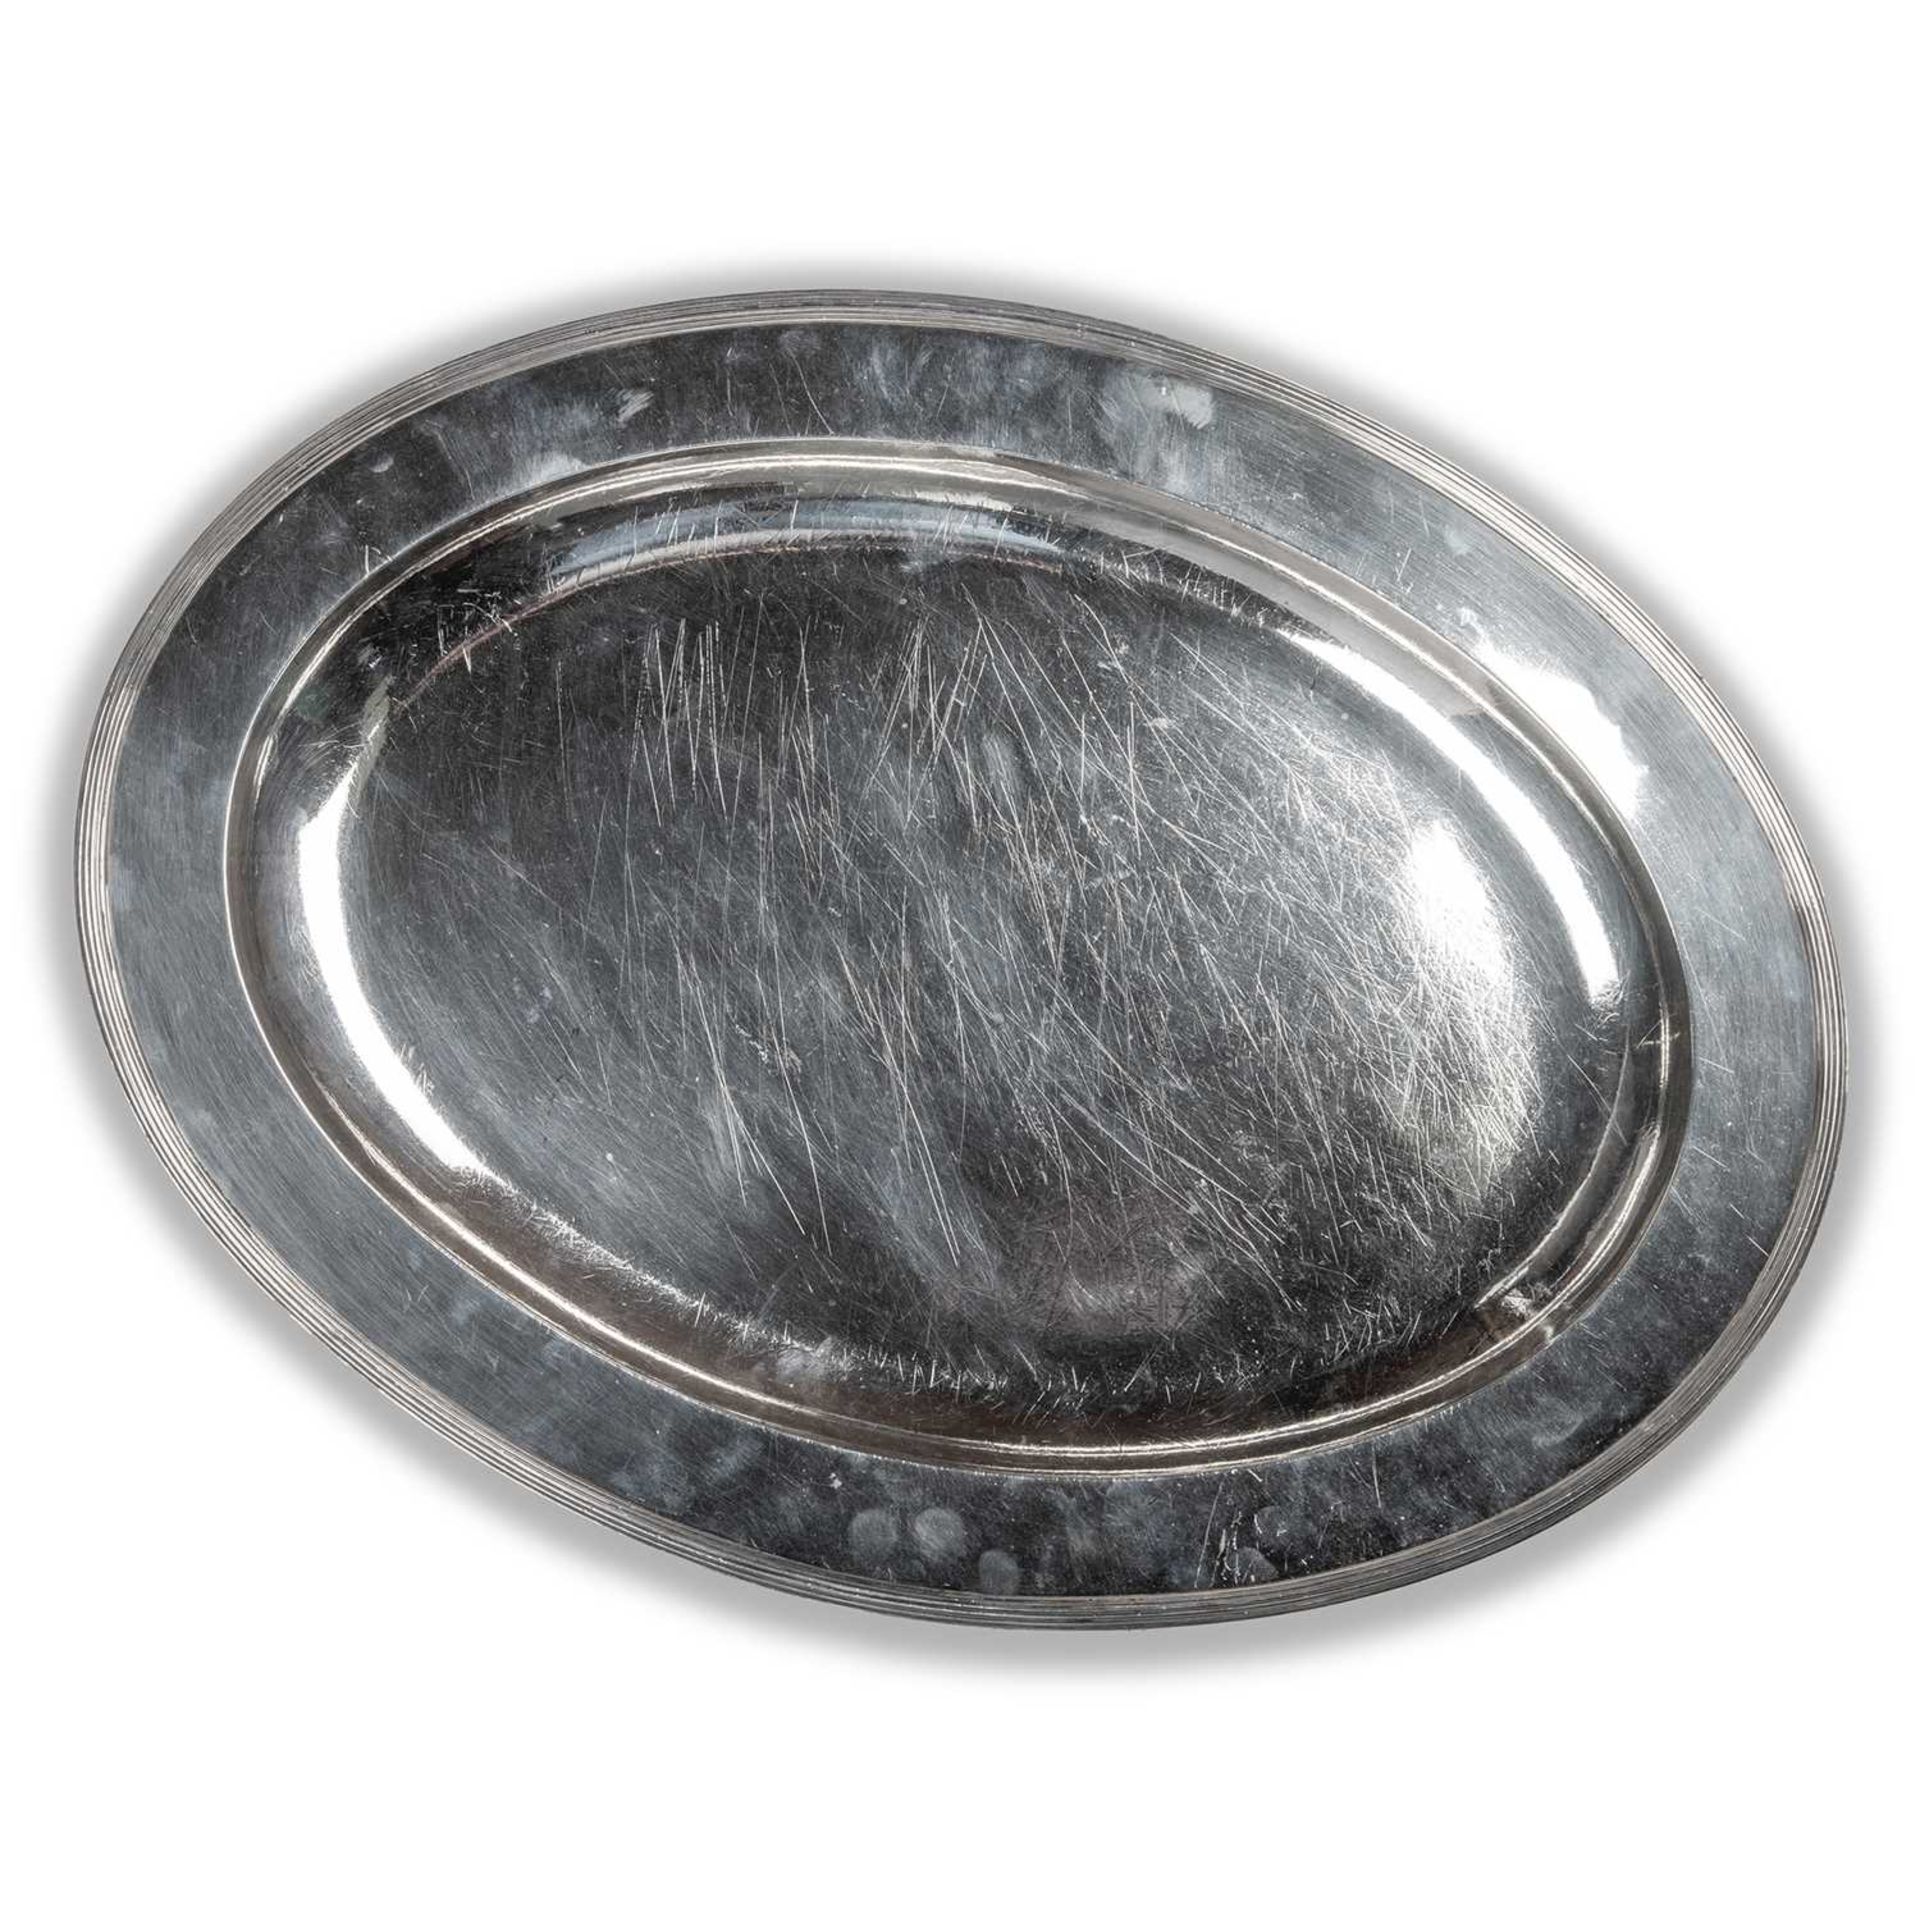 YORK TOWNMARK: A GEORGE III PROVINCIAL SILVER MEAT DISH